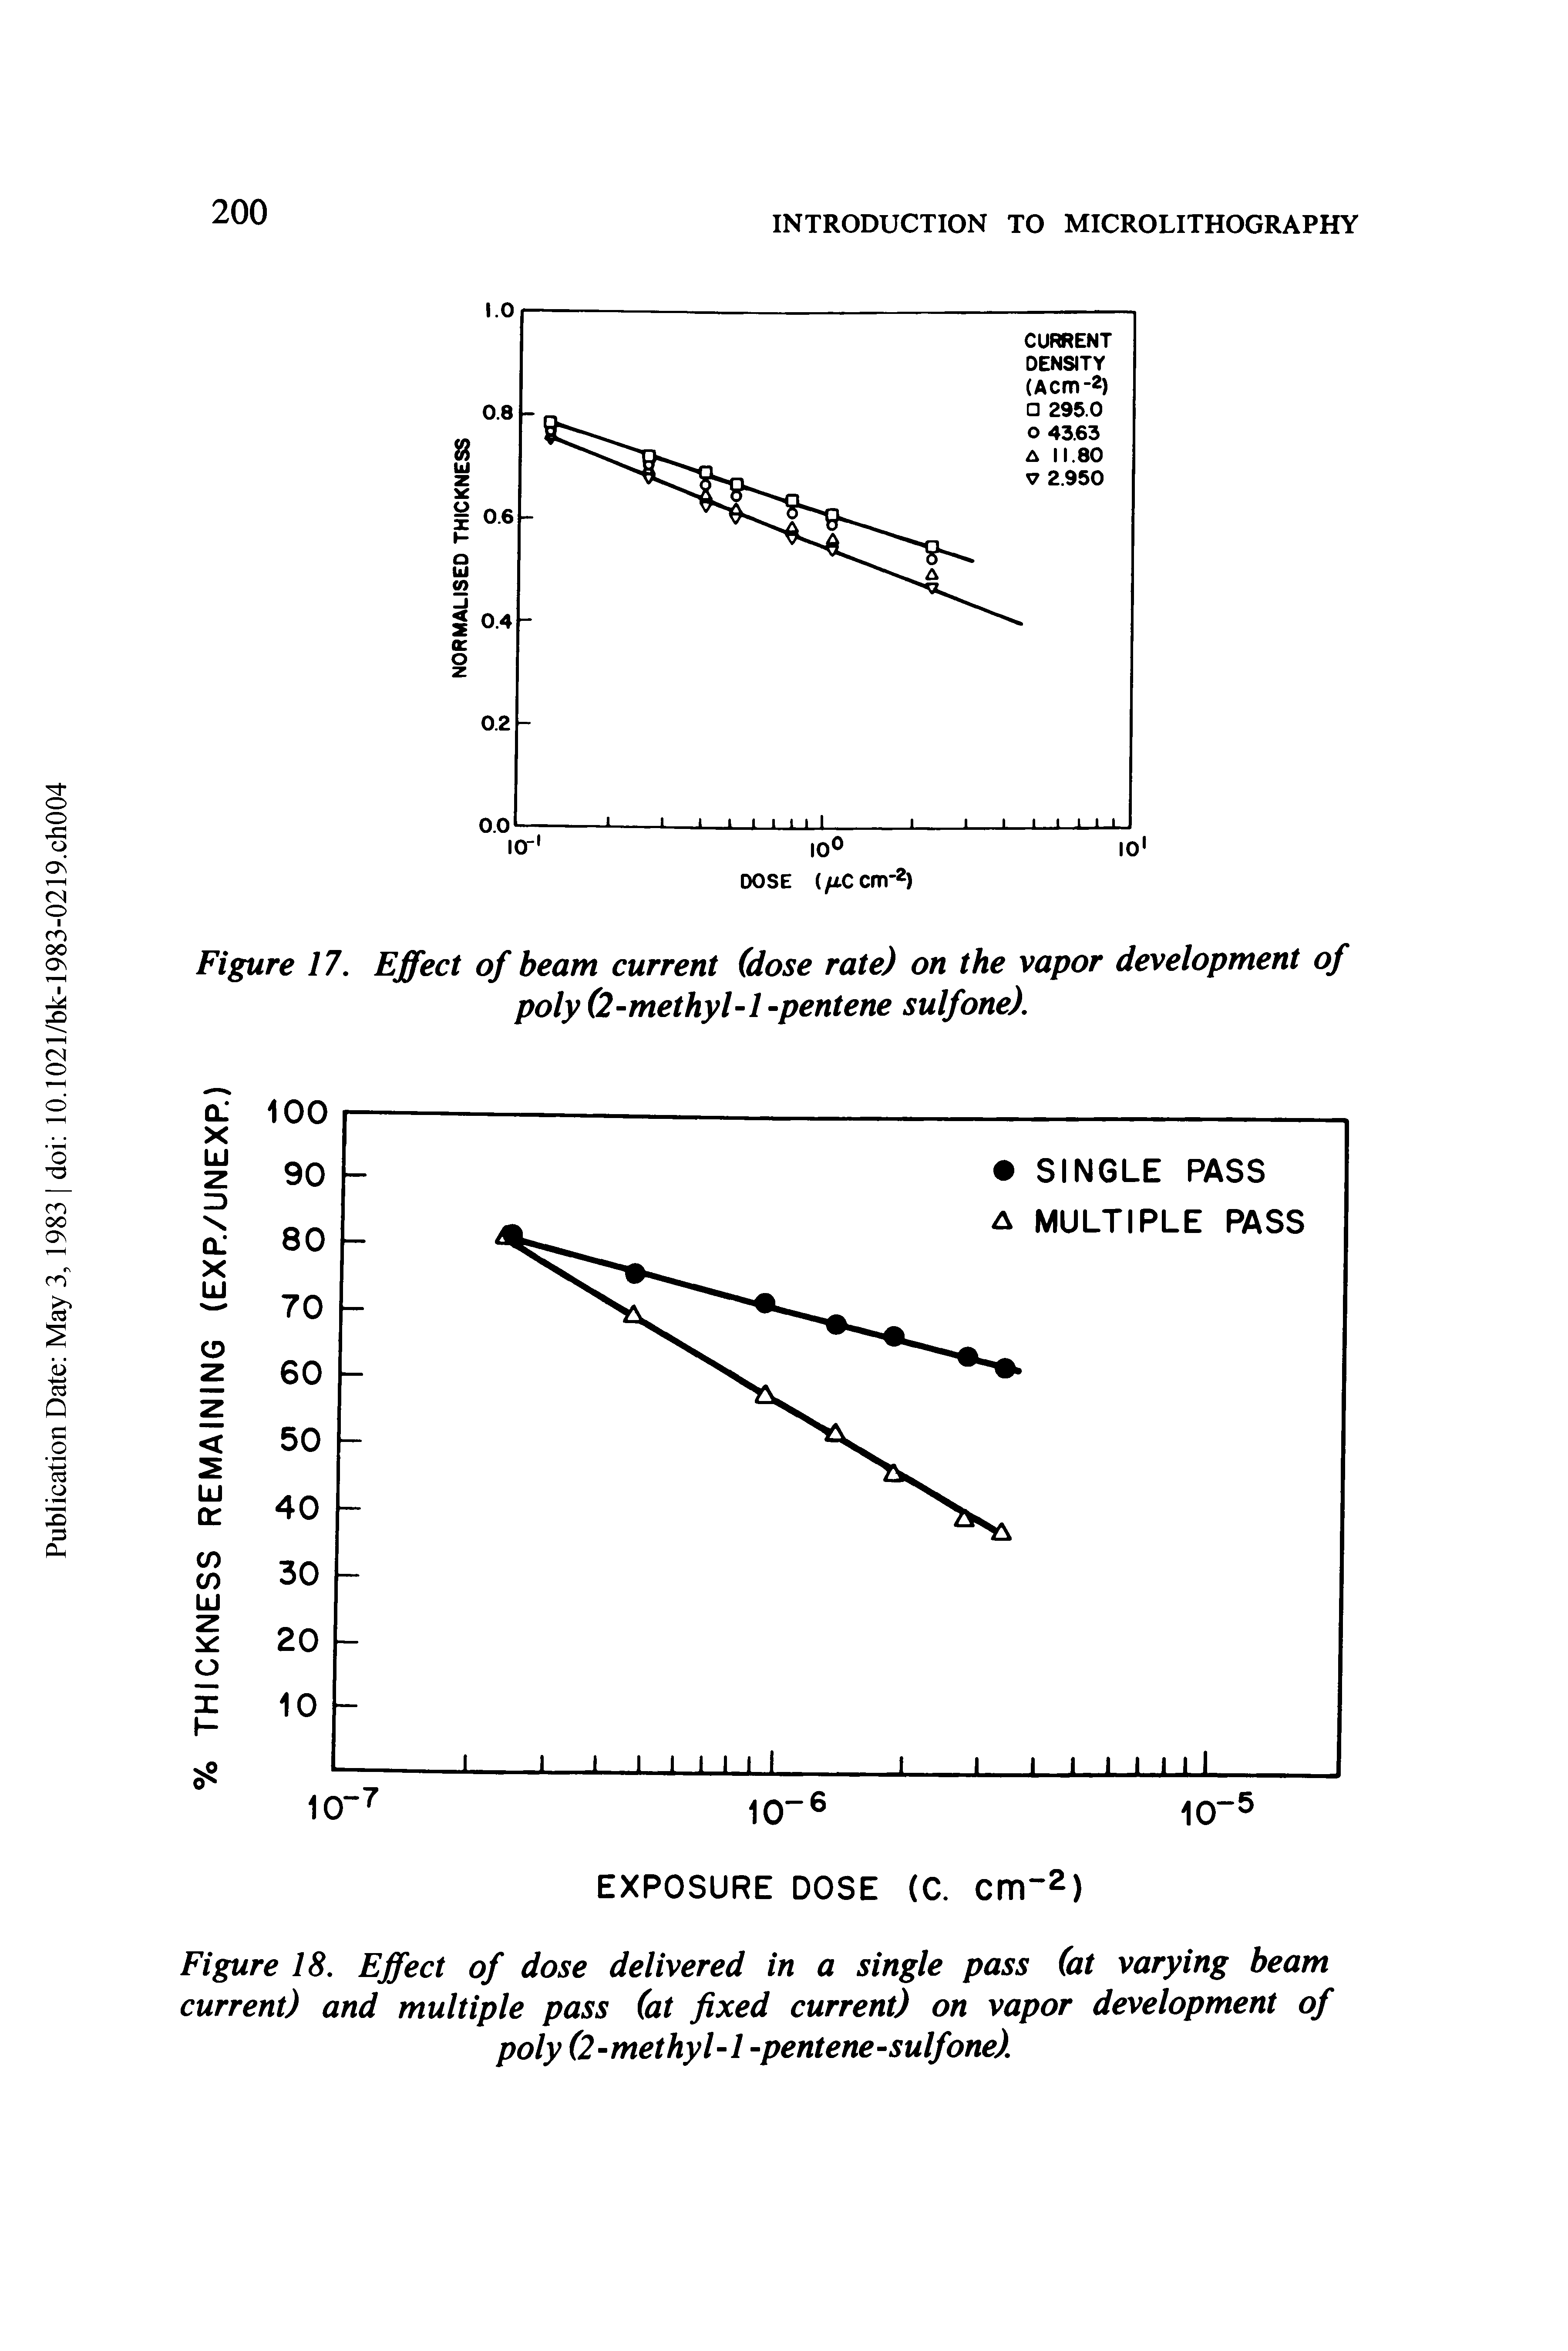 Figure 17. Effect of beam current (dose rate) on the vapor development of poly (2-methyl-1 -pentene sulfone).